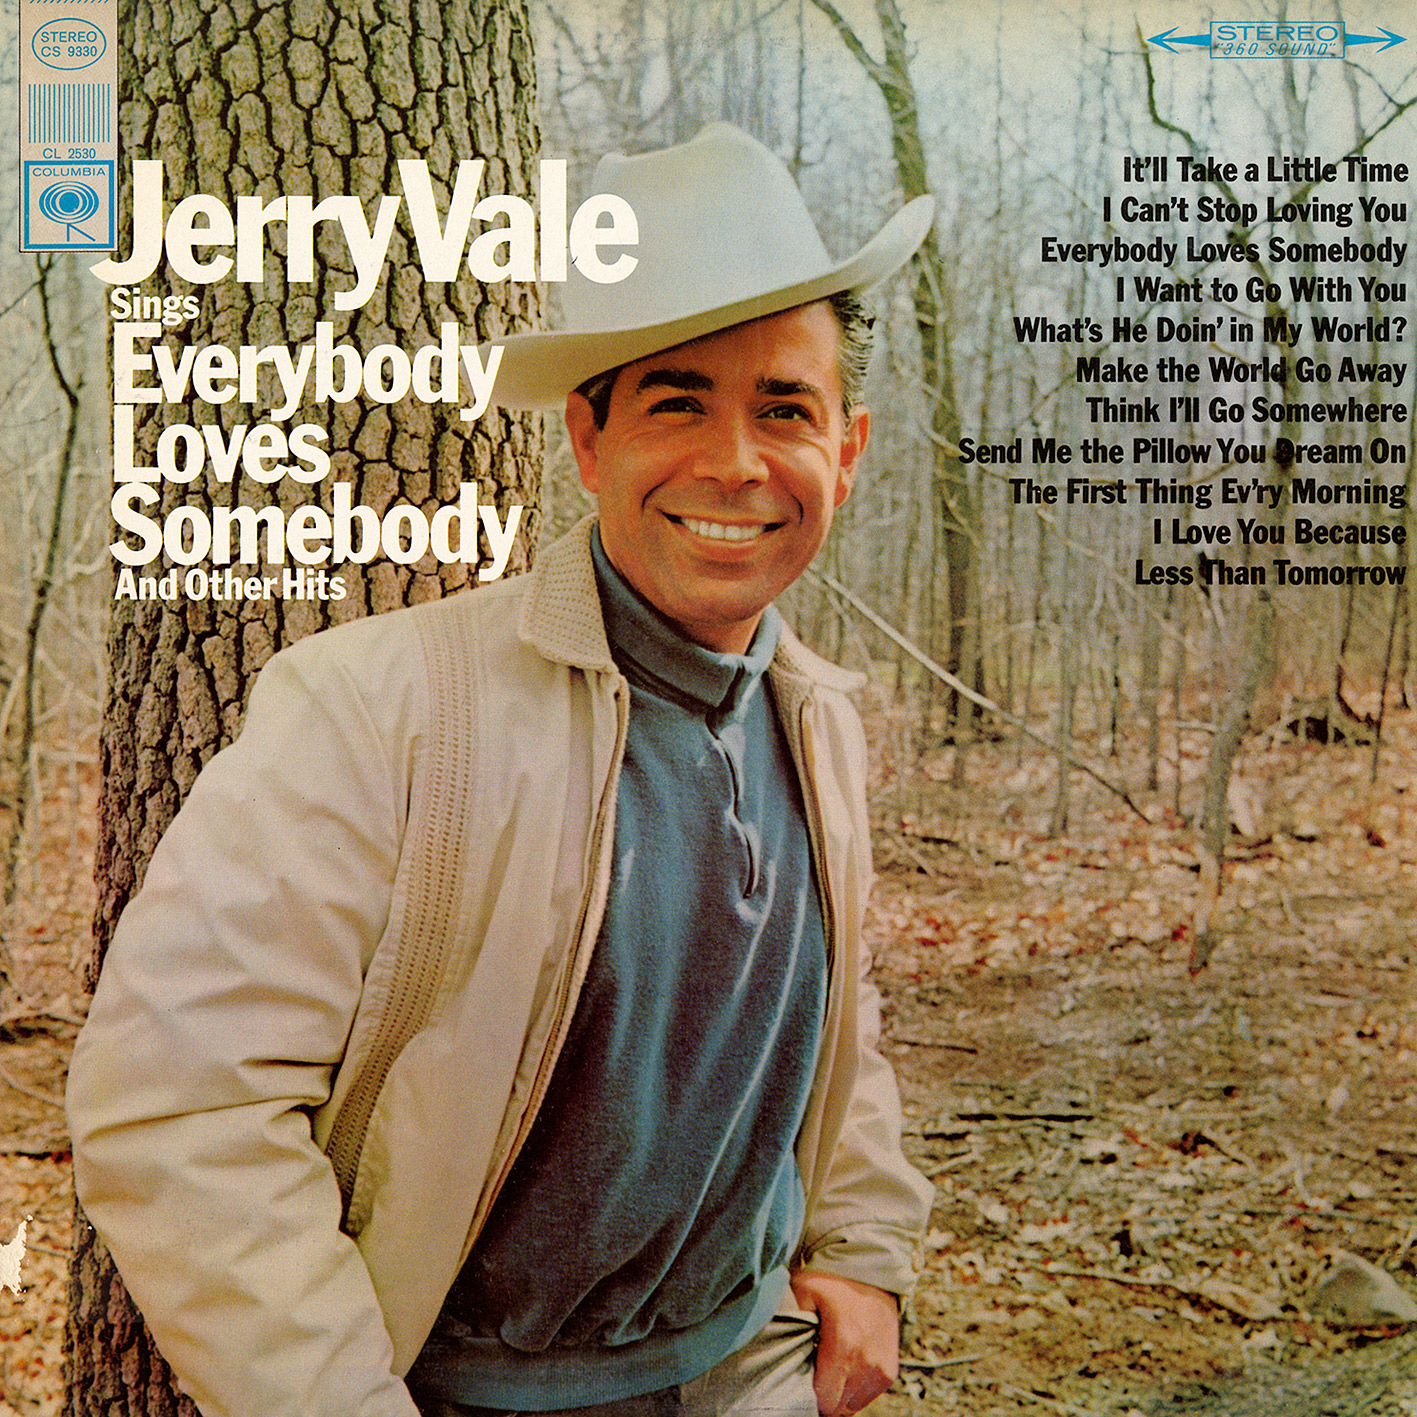 Jerry Vale - Sings Everybody Loves Somebody And Other Hits (1966/2016) [HDTracks FLAC 24bit/192kHz]